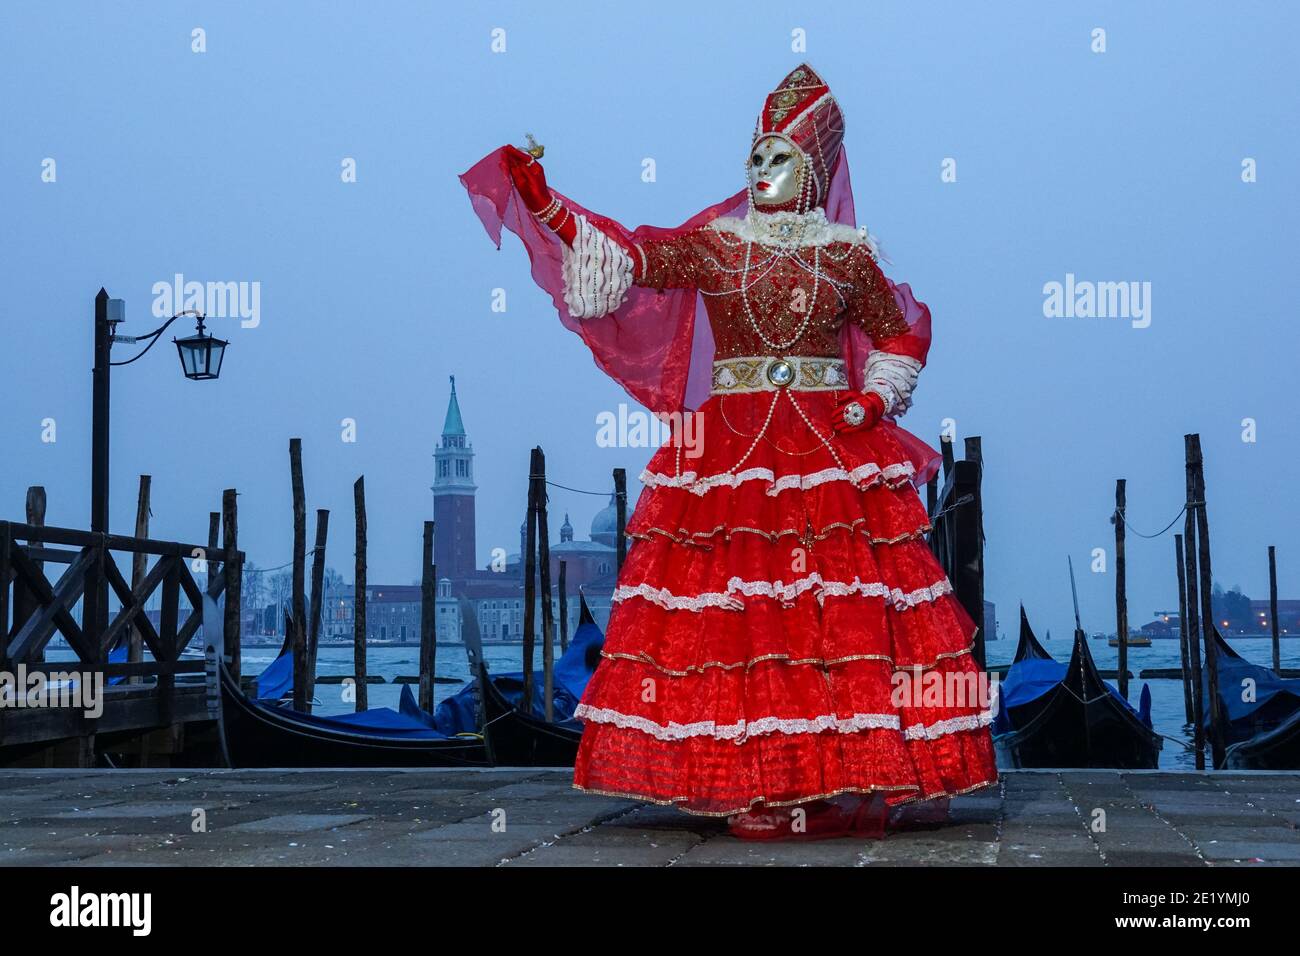 Woman dressed in traditional decorated costume and mask during the Venice Carnival with the San Giorgio Monastery in the background Venice, Italy Stock Photo